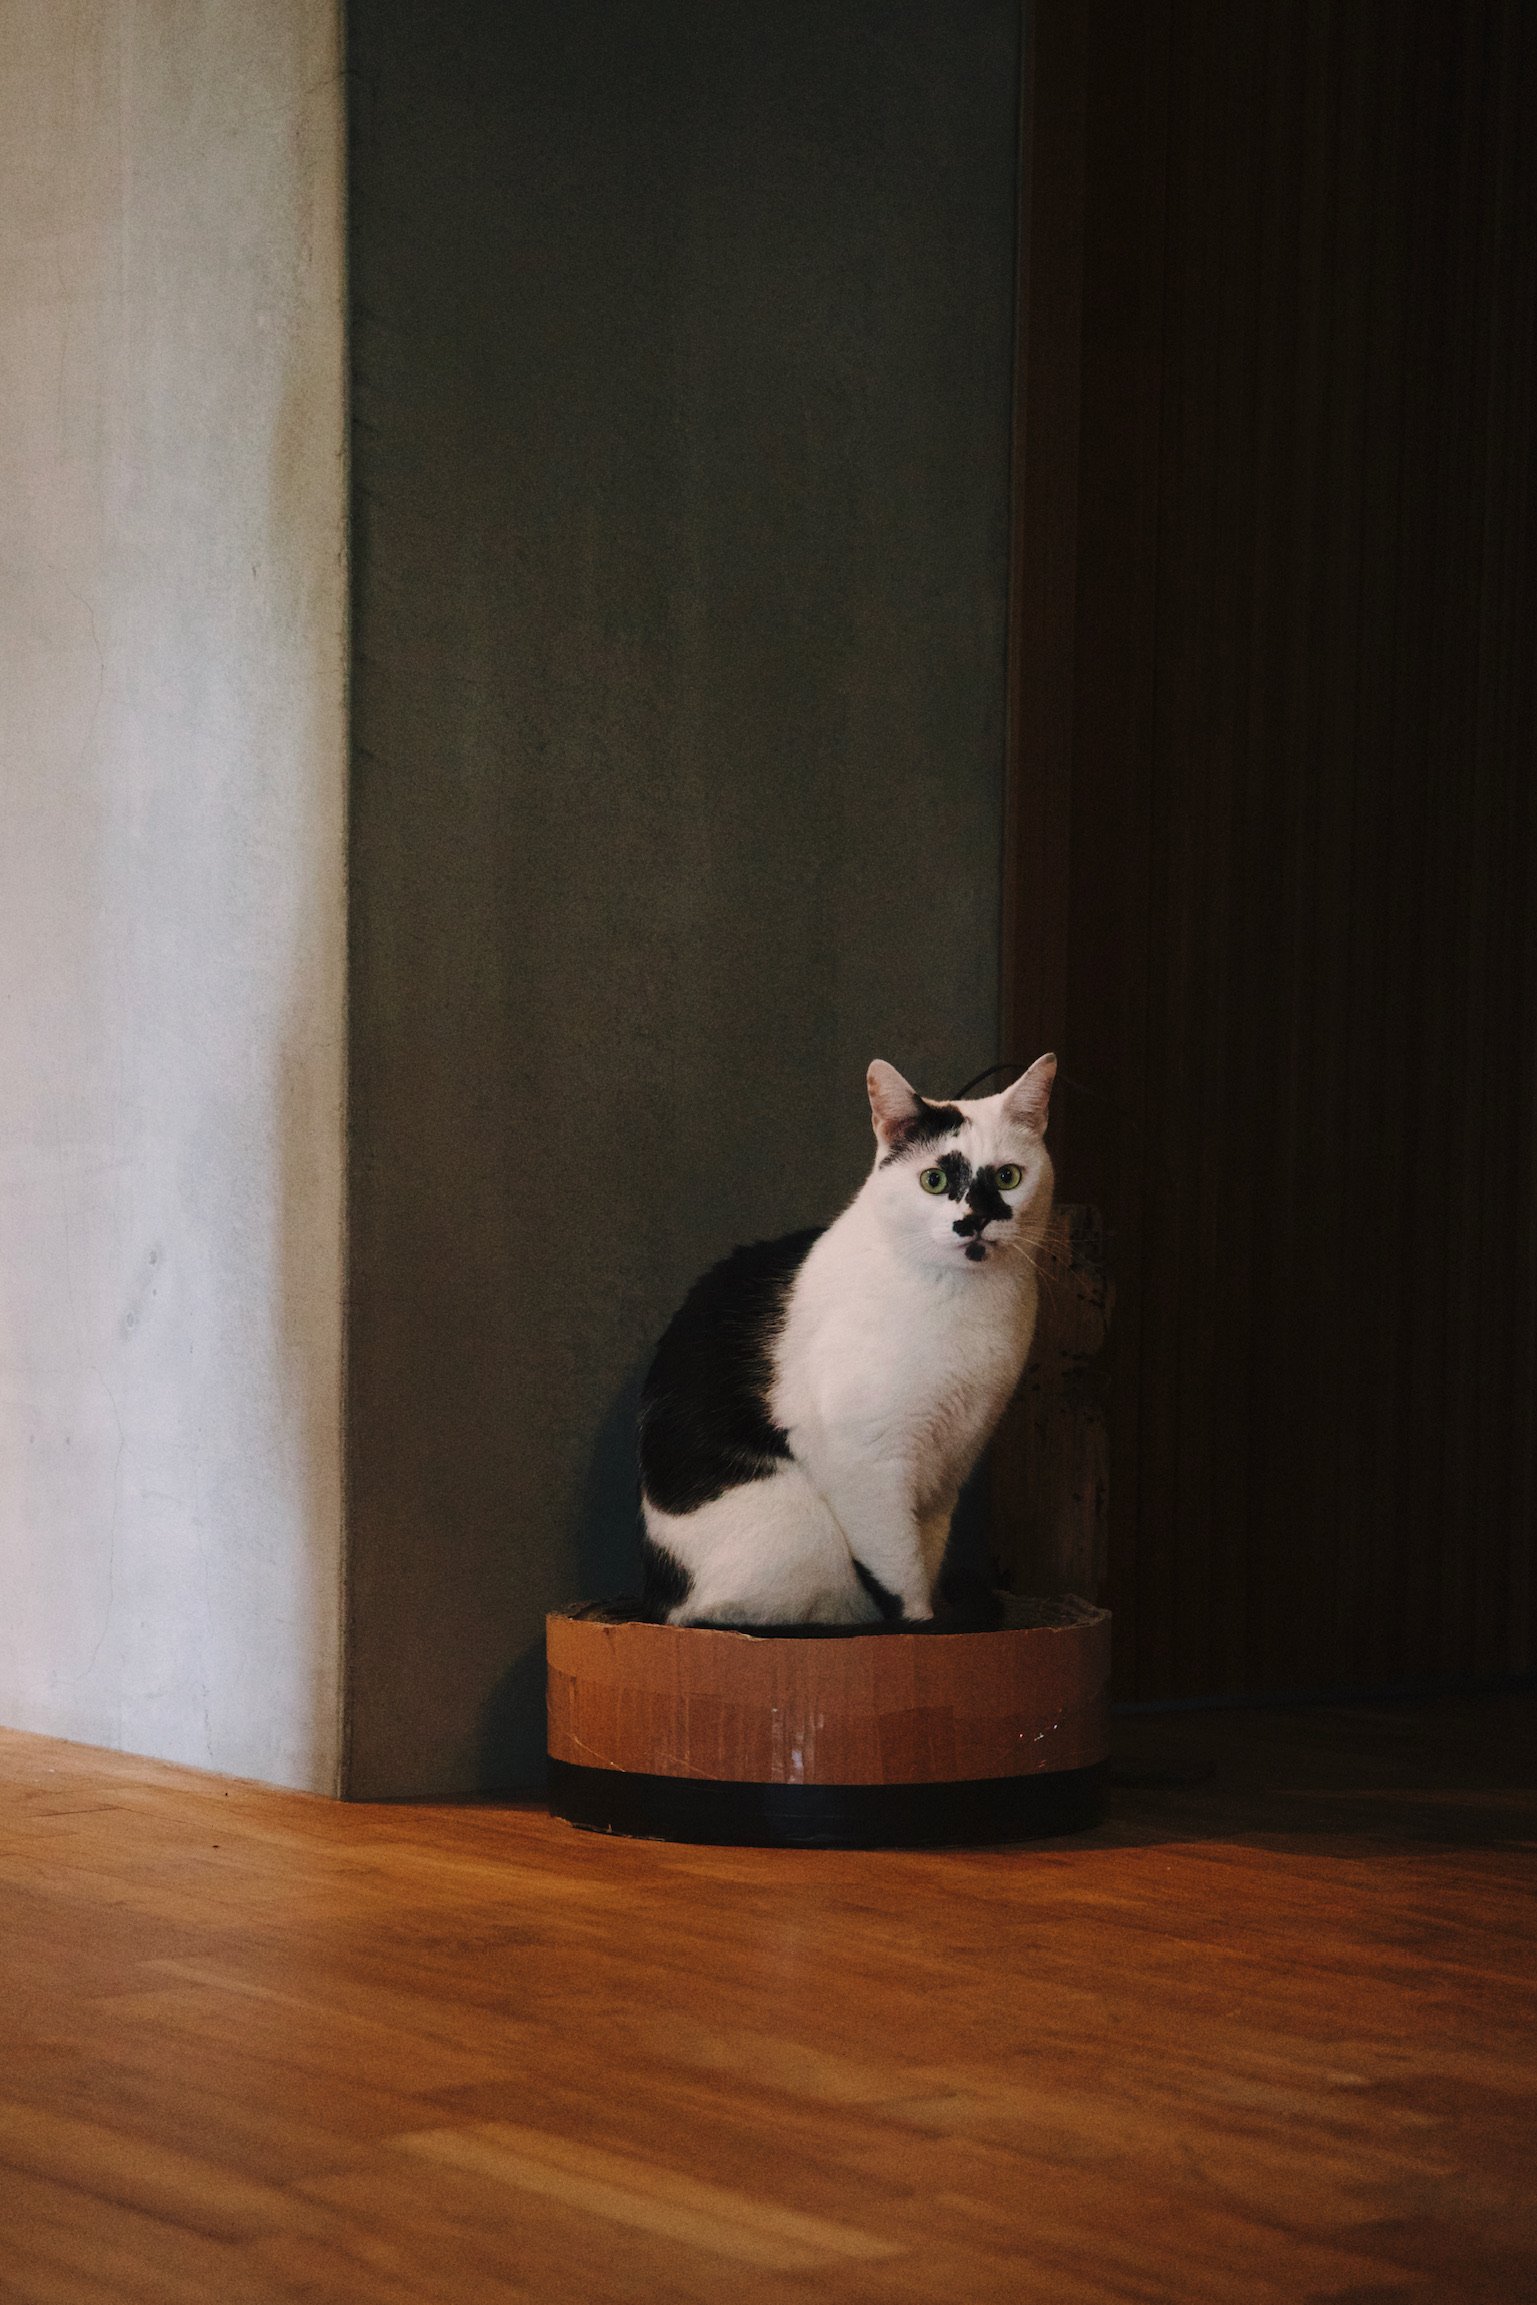 A cow cat sitting on a scratch bowl in front of an exposed concrete wall, wooden panel flooring.